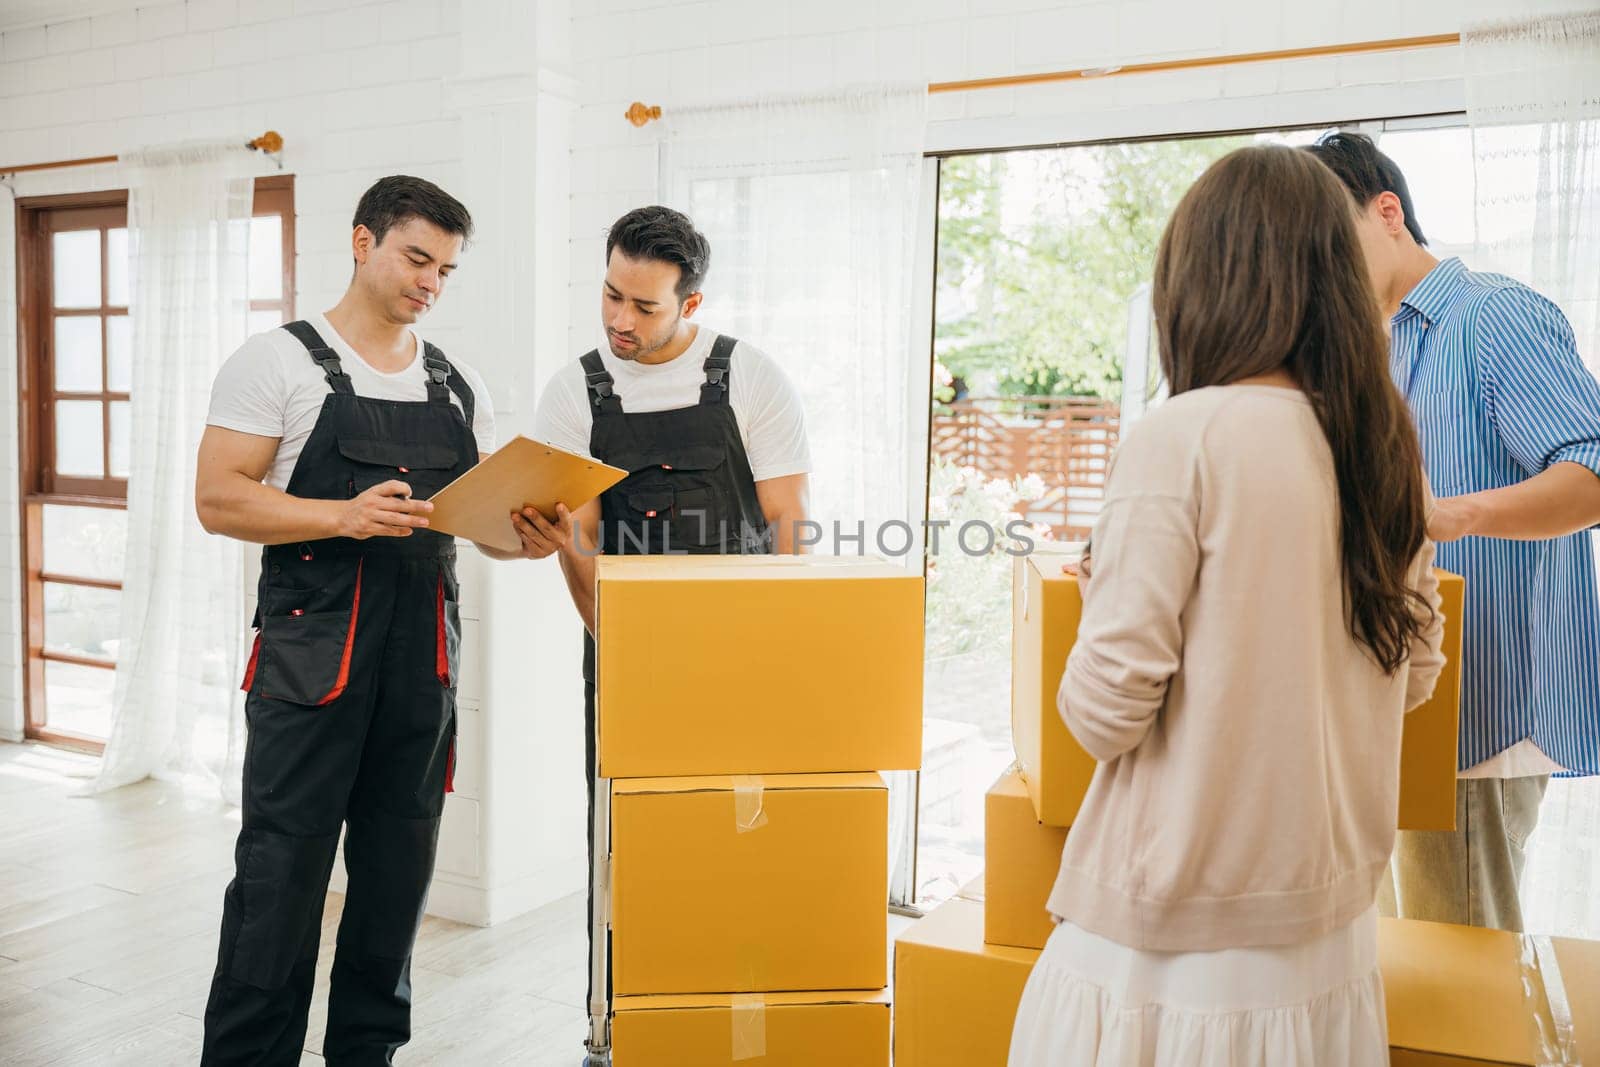 Couple checks moving checklist worker holds cardboard box. Professional movers ensure smooth relocation service. Teamwork and efficient home moving displayed. Movind Day